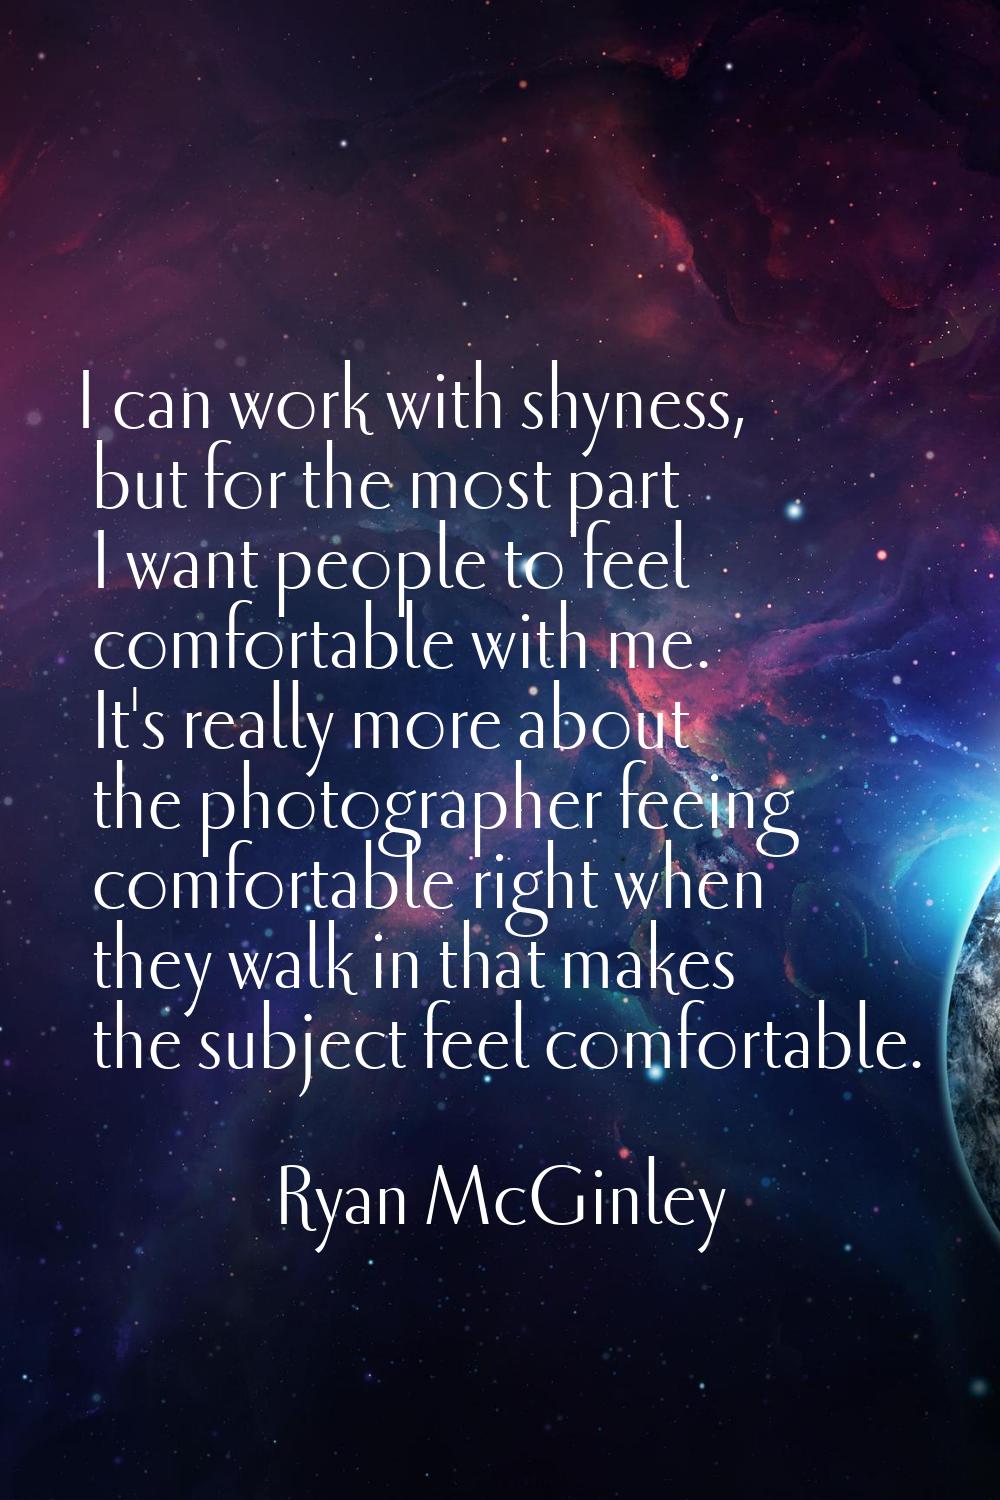 I can work with shyness, but for the most part I want people to feel comfortable with me. It's real